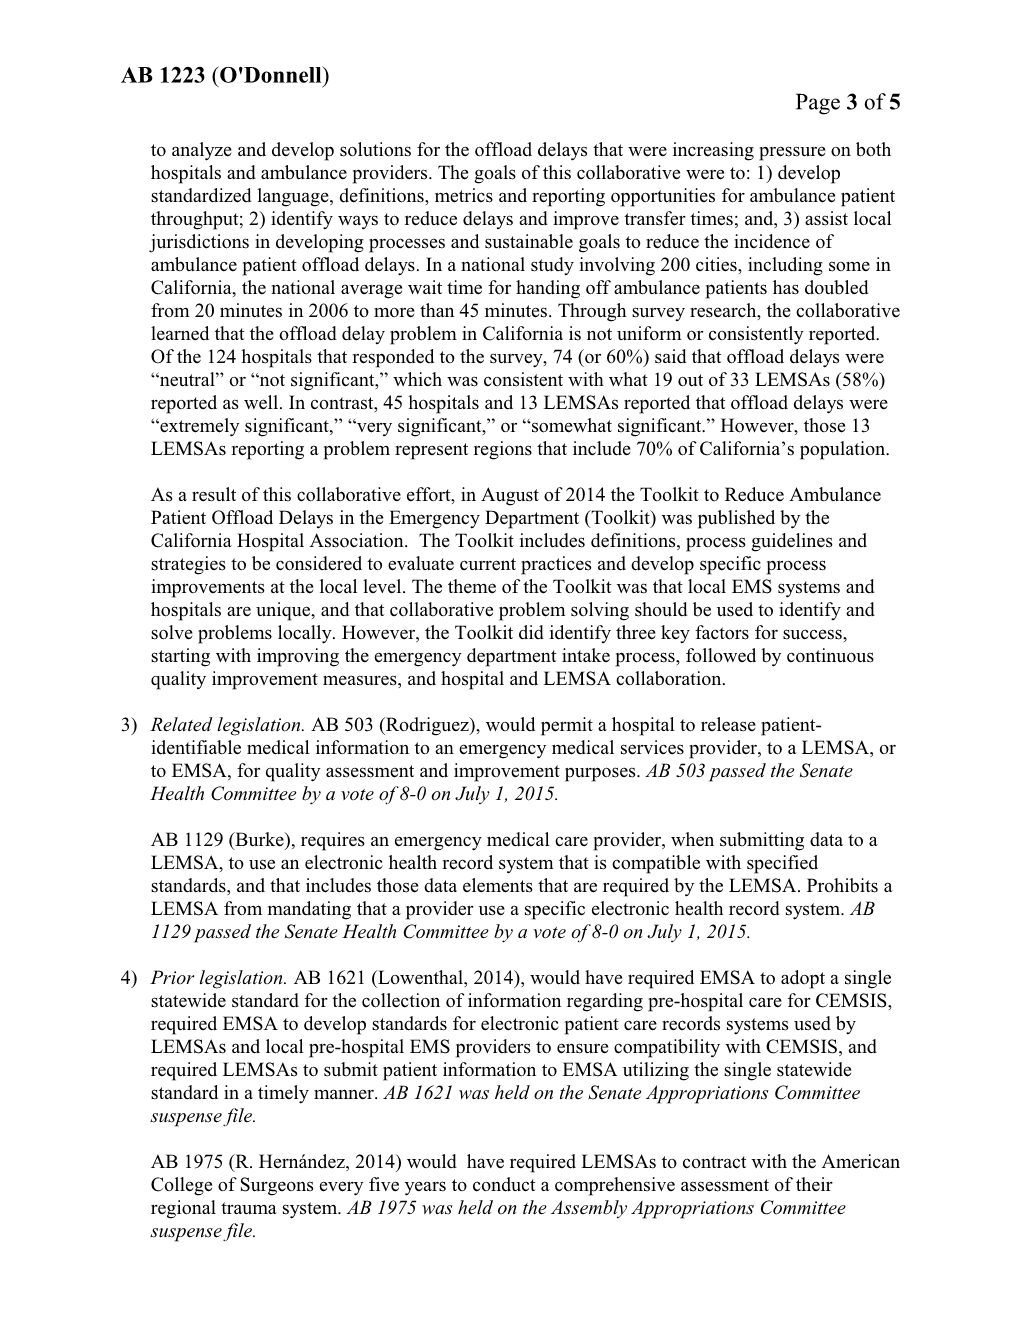 AB 1223 (O'donnell) Page 2 of 2